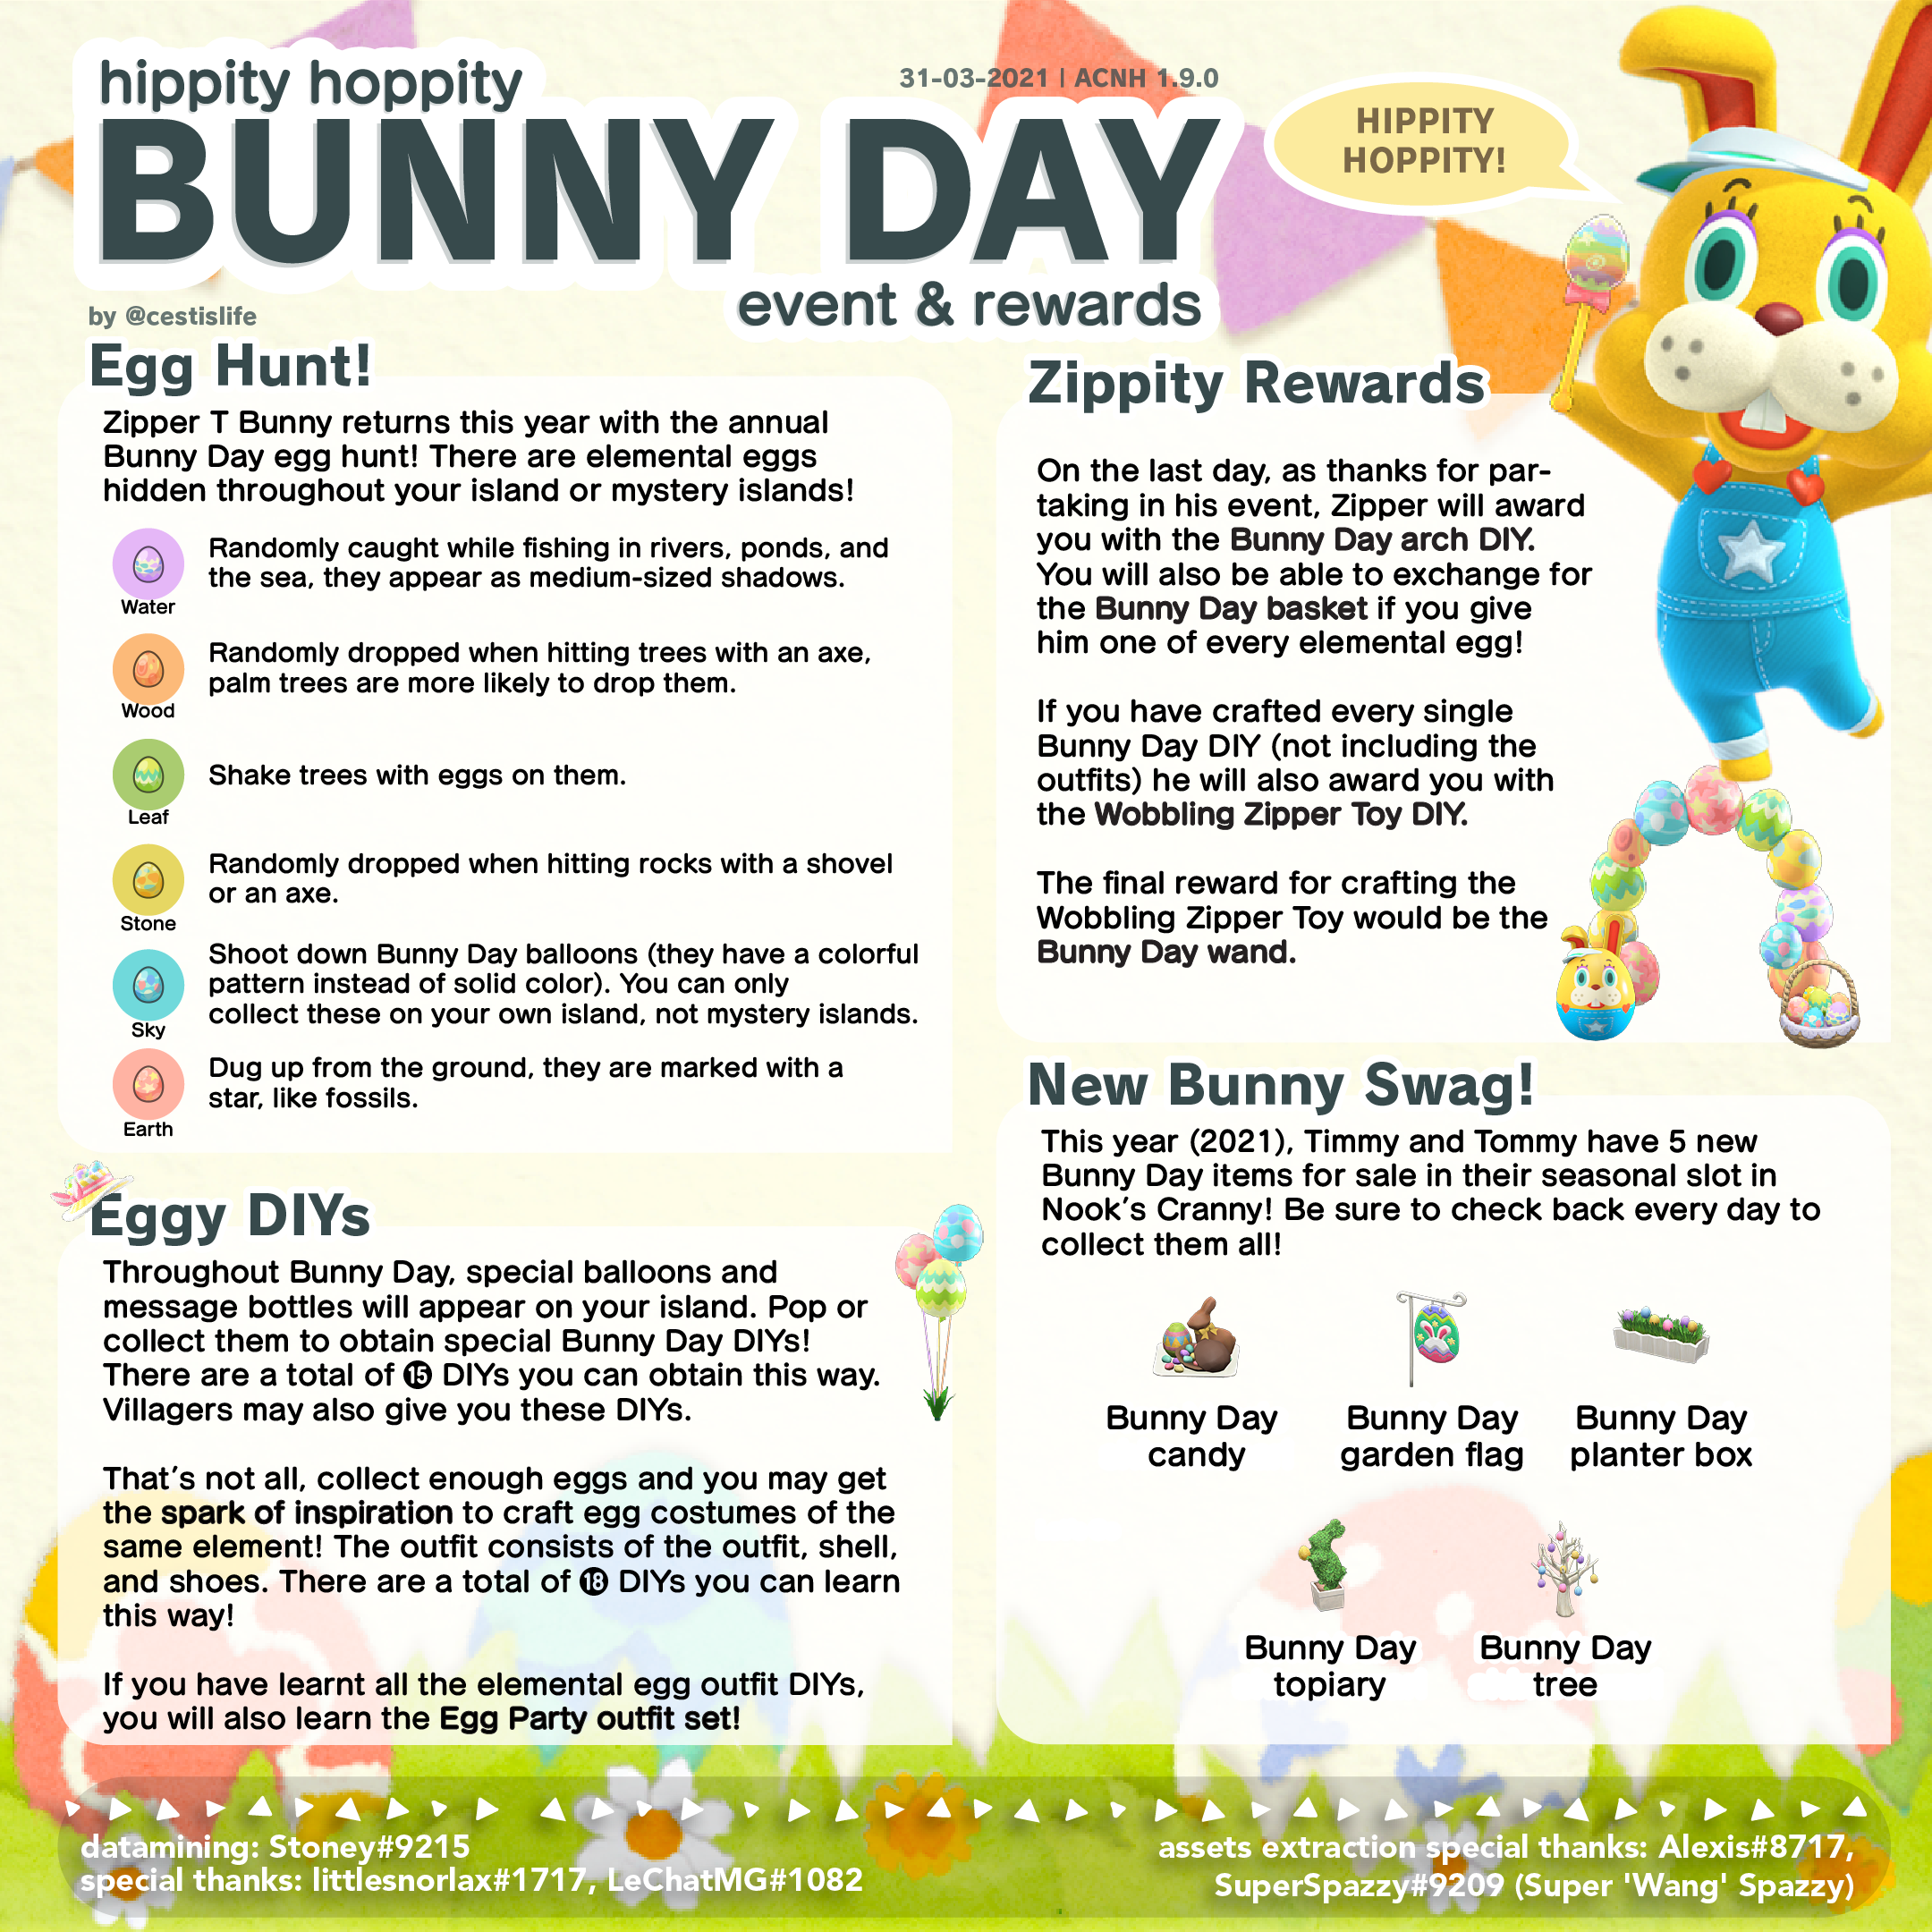 Bunny Day Guide cestislife's visual guides